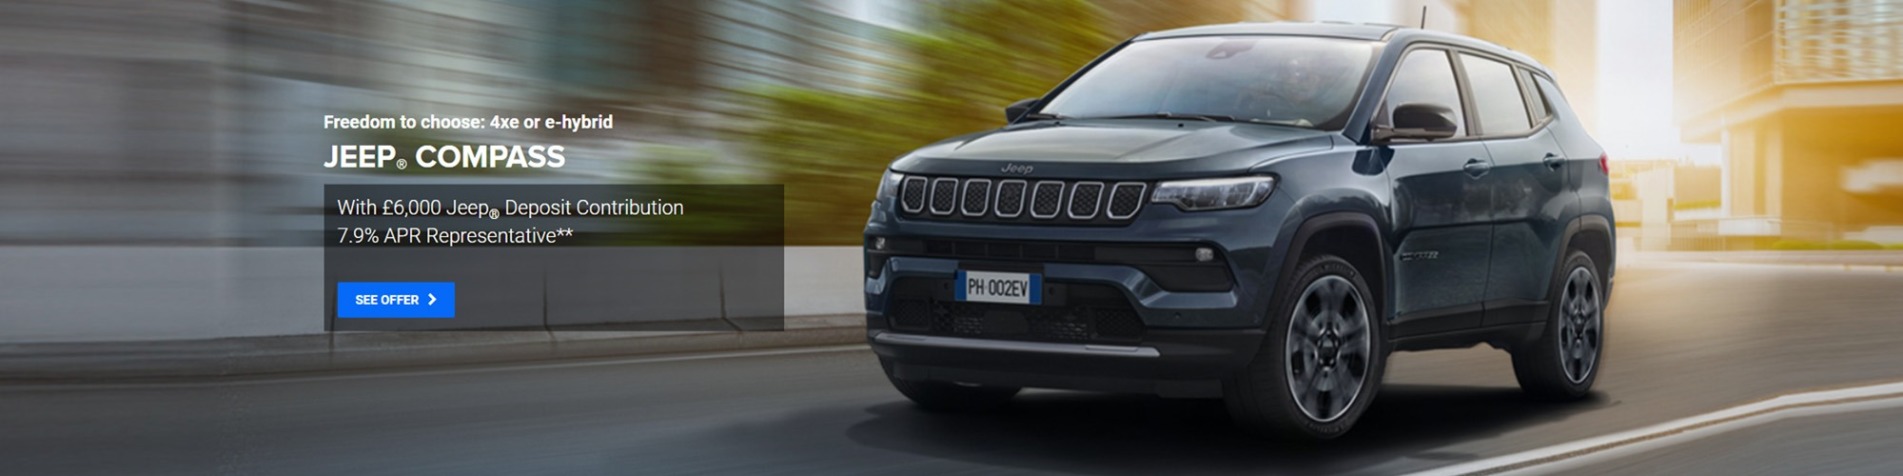 Jeep 4xe Compass Banner